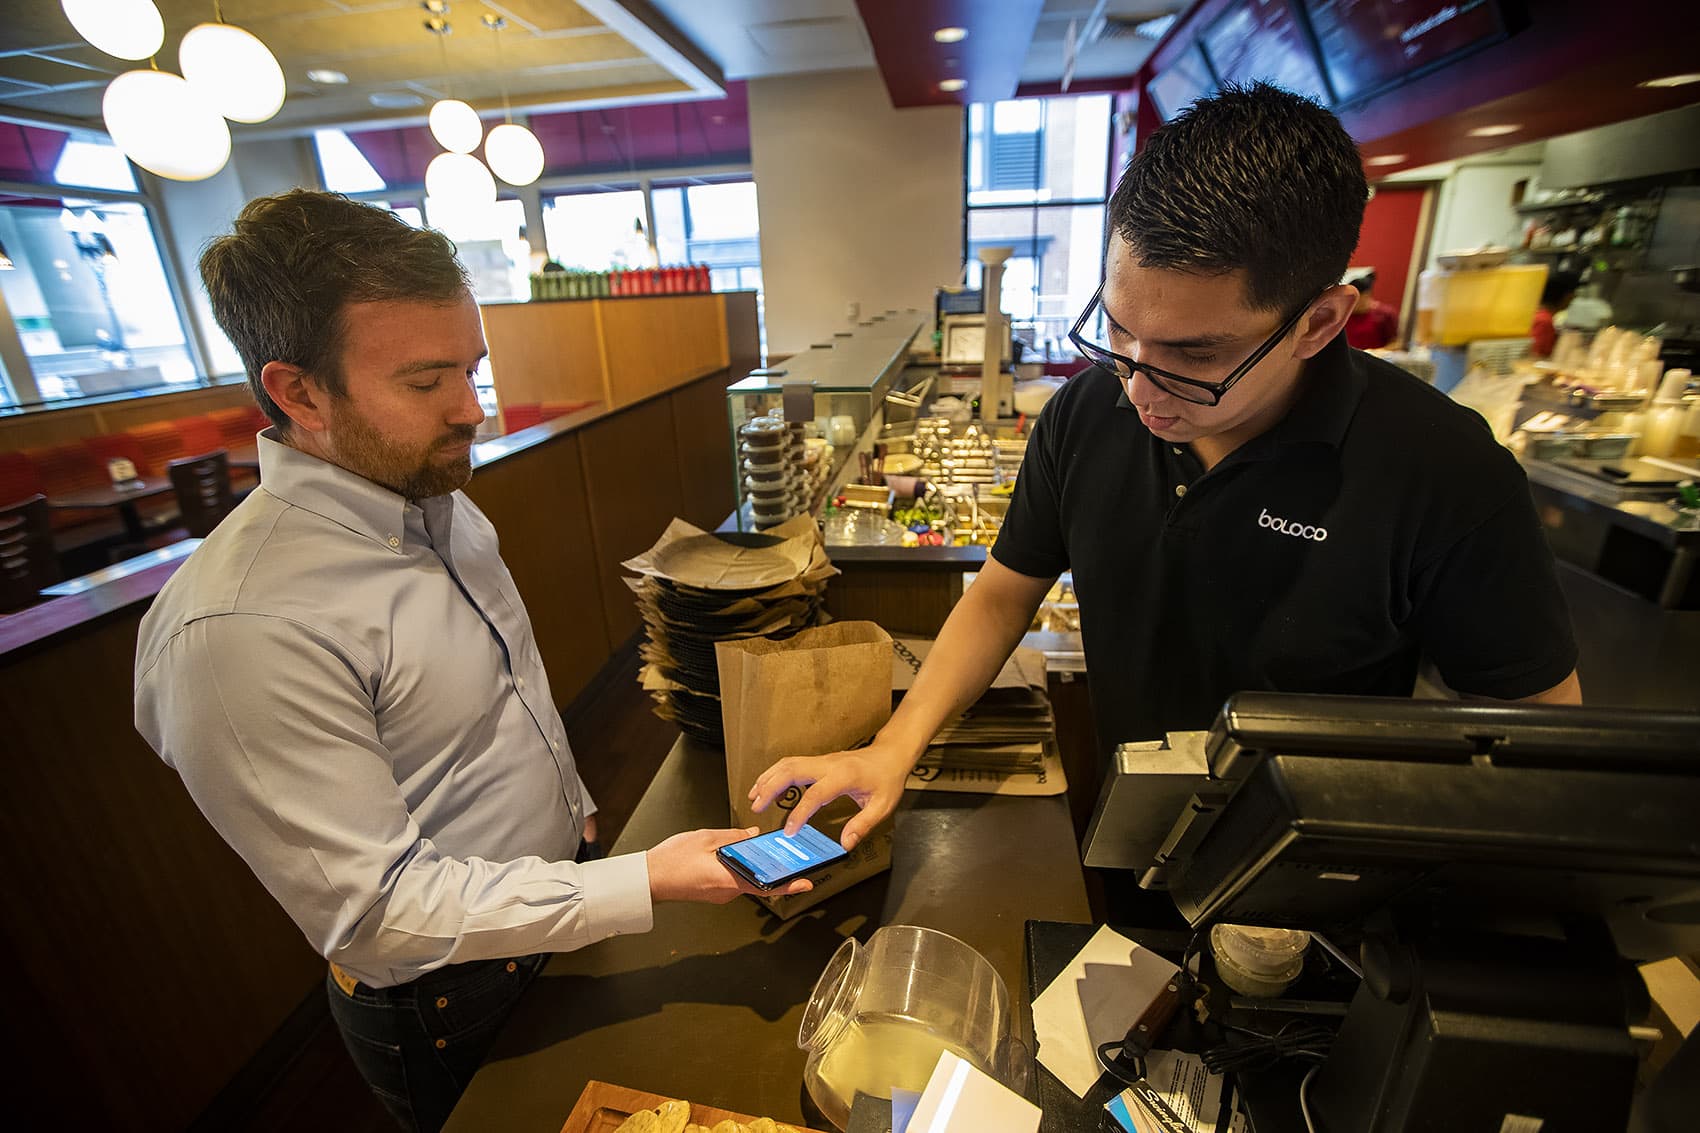 Boloco manager Erick Guitierrez taps Tom Leonard’s phone as he purchases a breakfast burrito with the “Food For All” app. (Jesse Costa/WBUR)